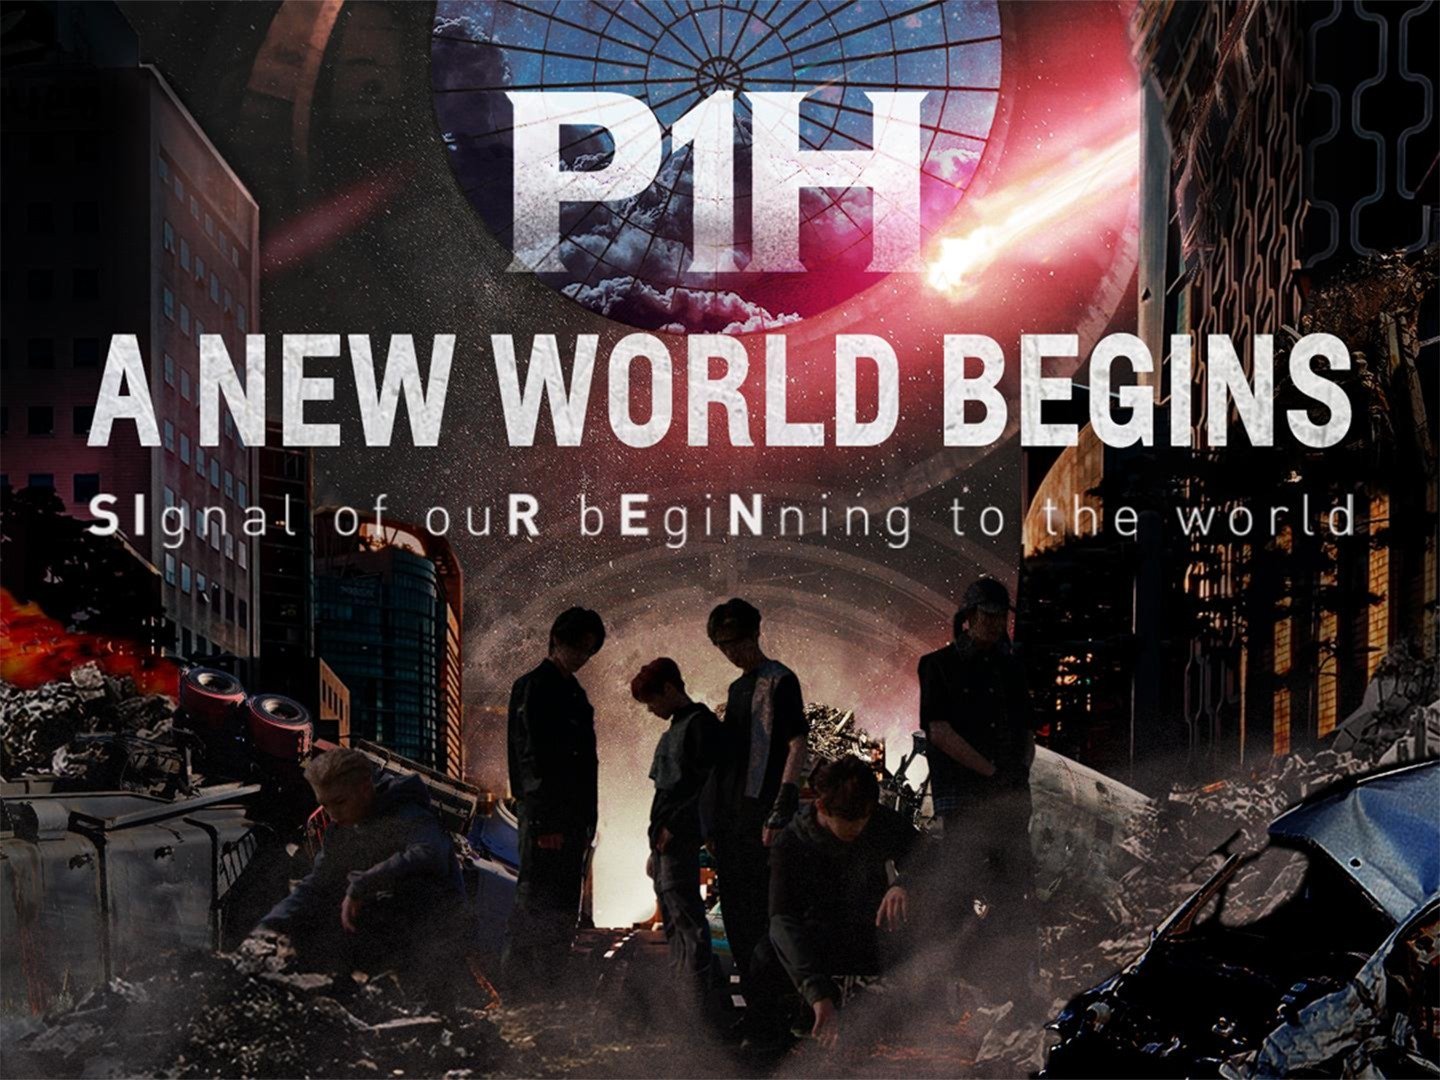 P1H: The Beginning of a New World Movie Plot Synopsis